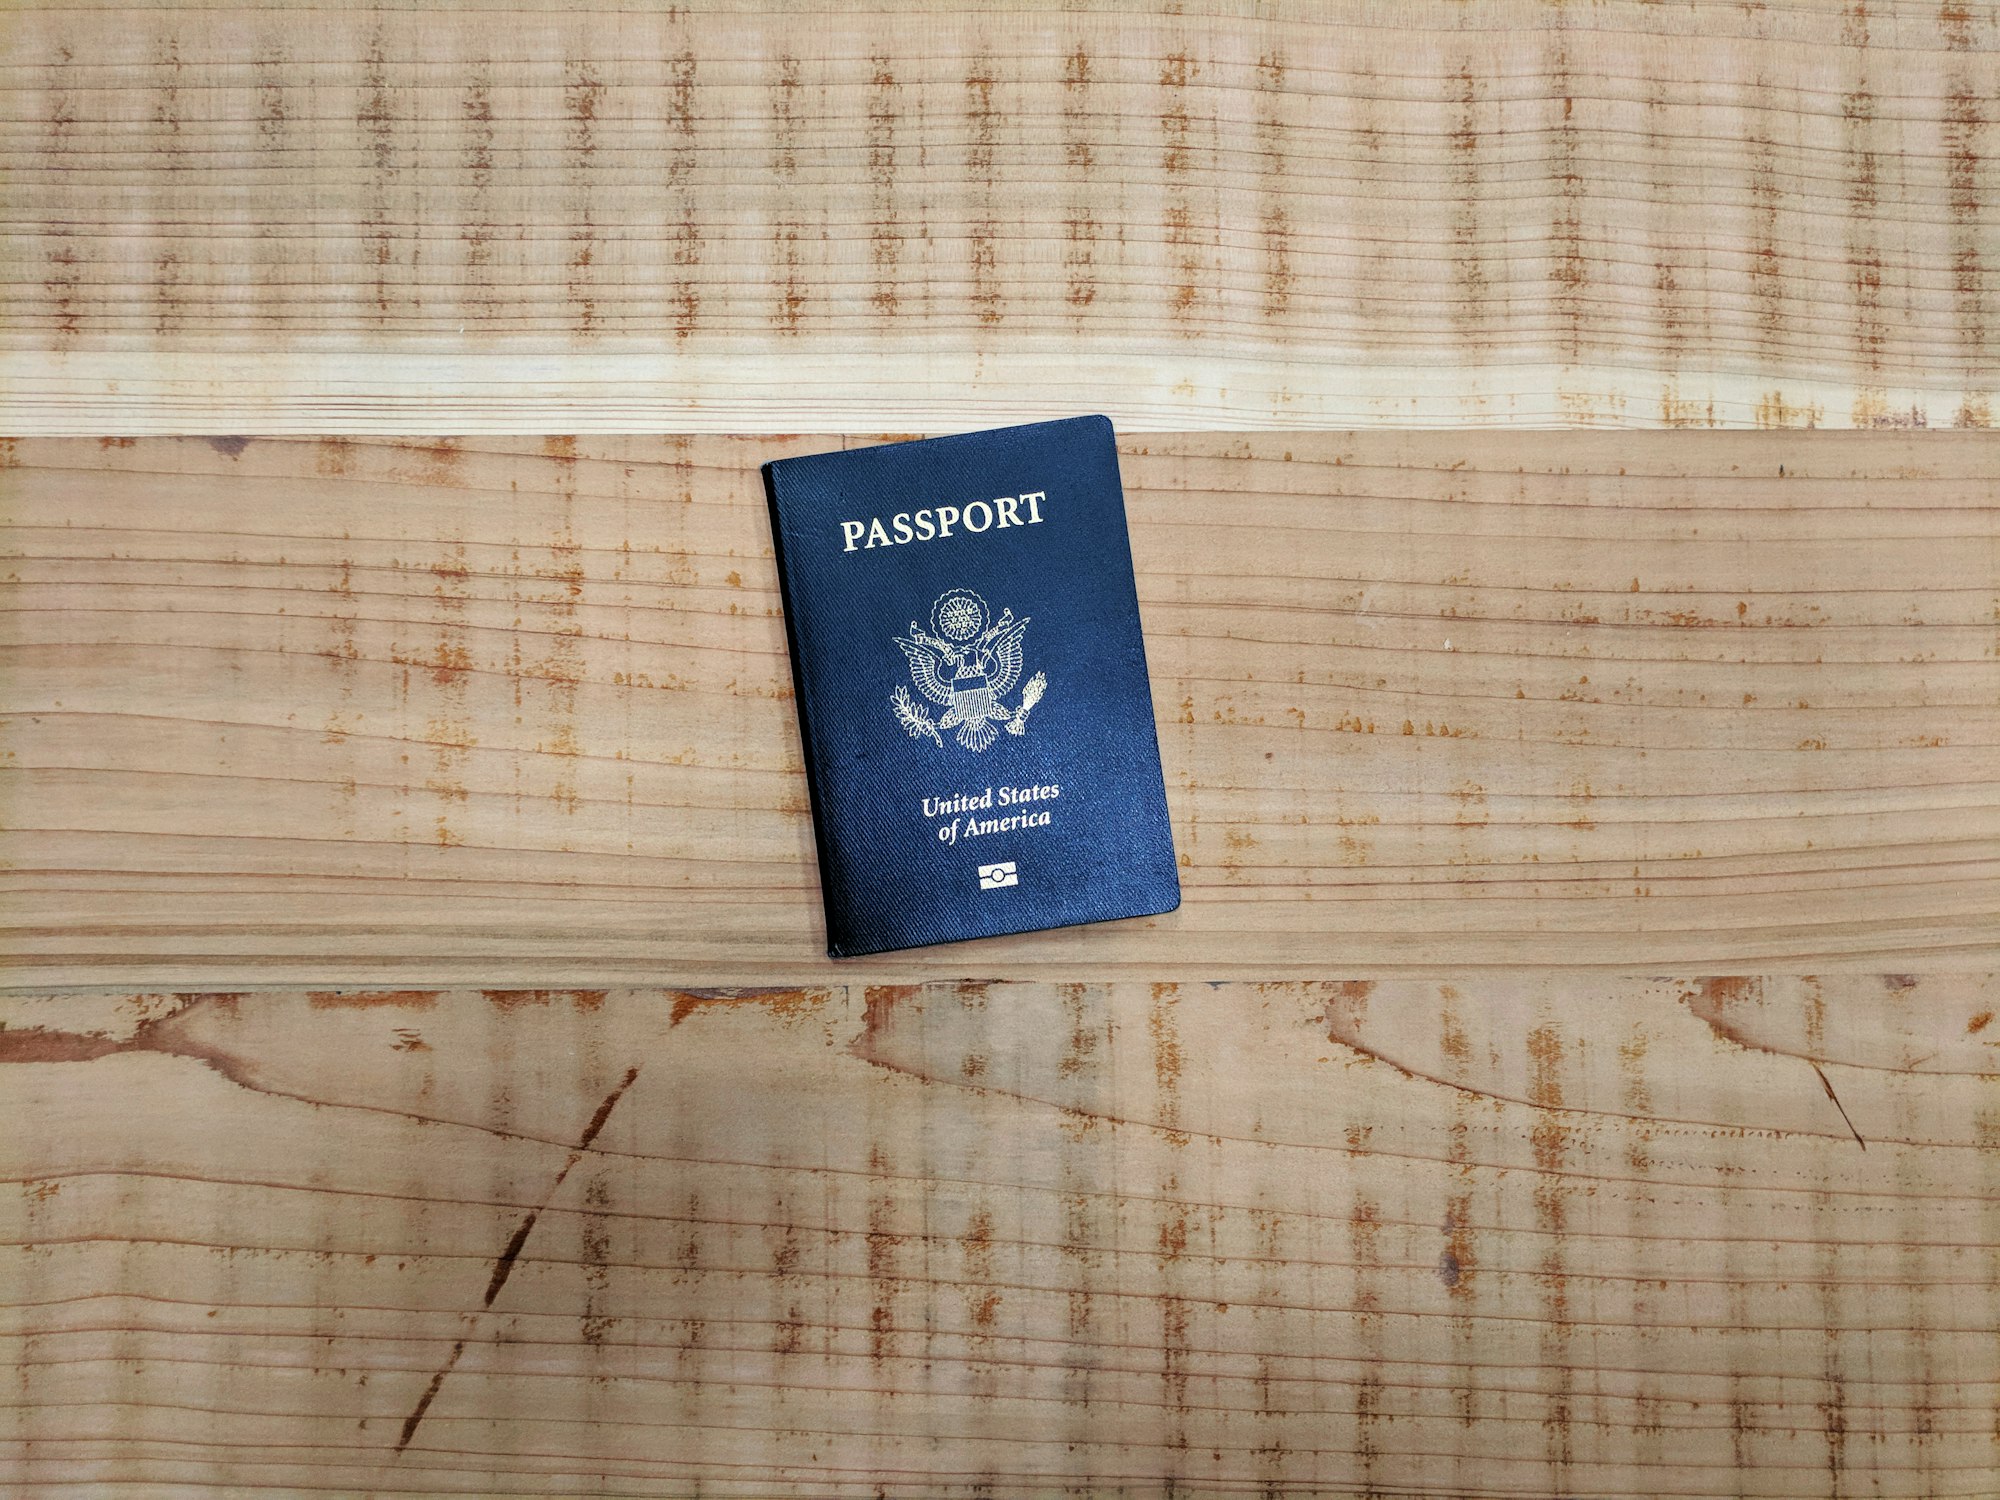 There were no U.S. Passport photos that I could find on Unsplash so I pulled mine out and took this picture with my Pixel XL.